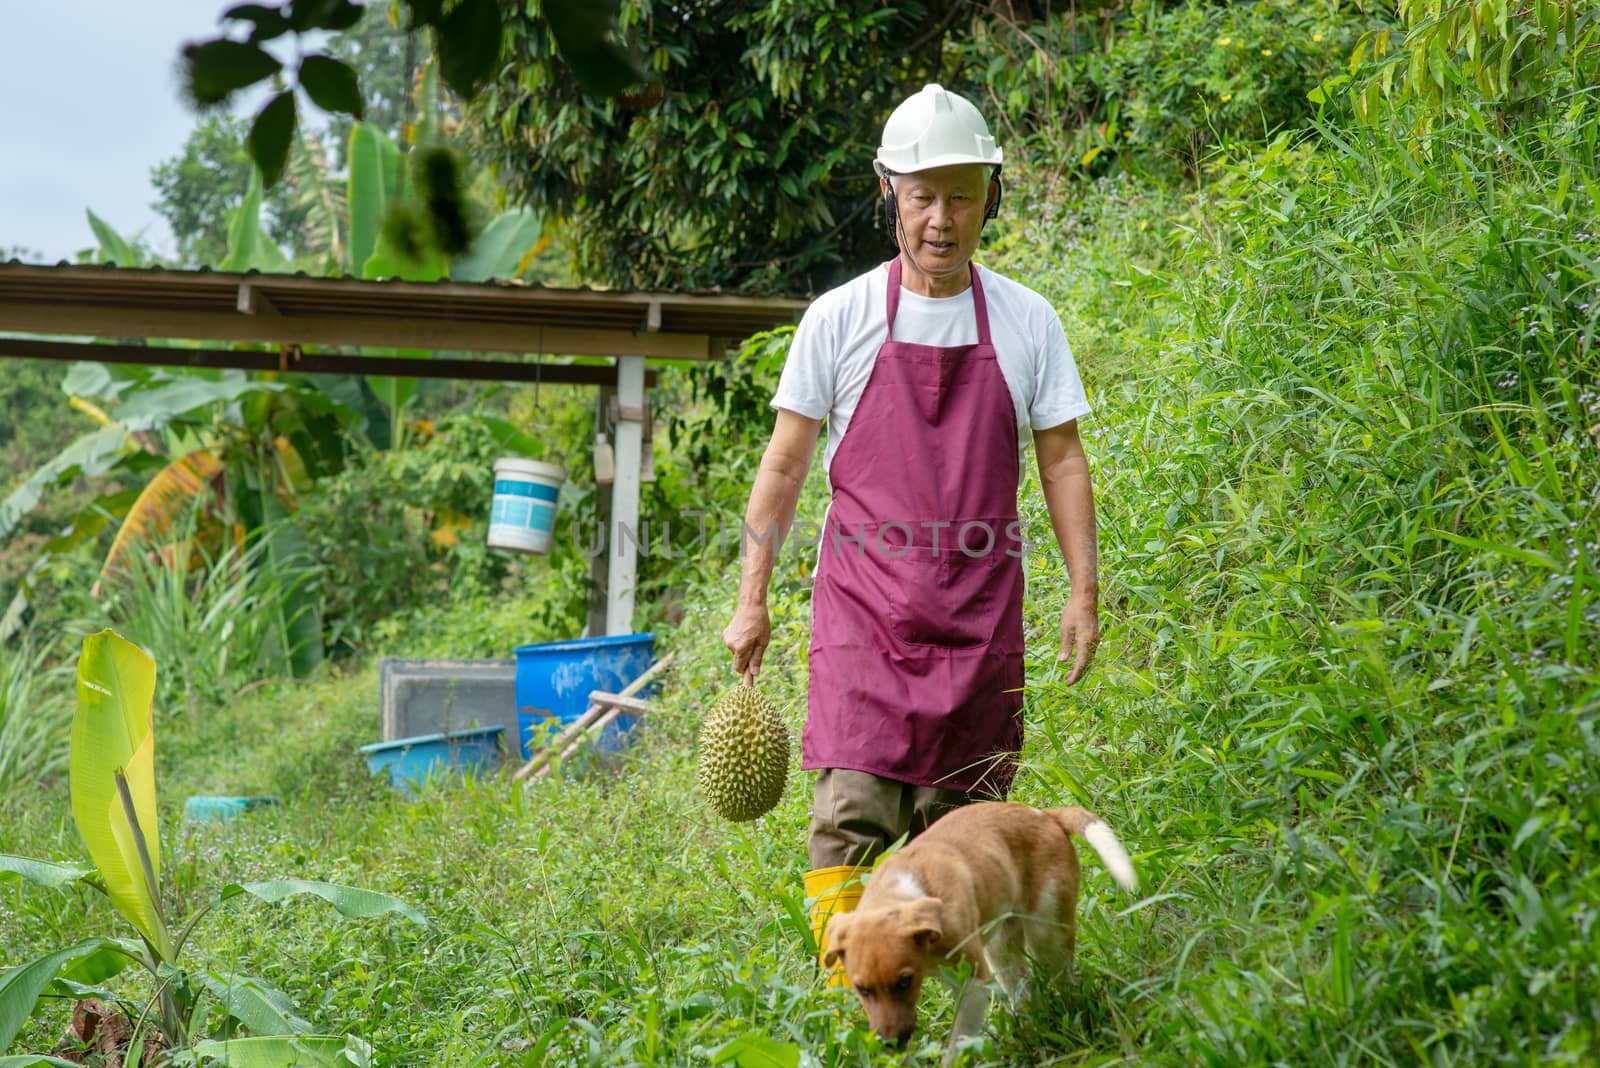 Farmer holding Musang king durian in orchard.